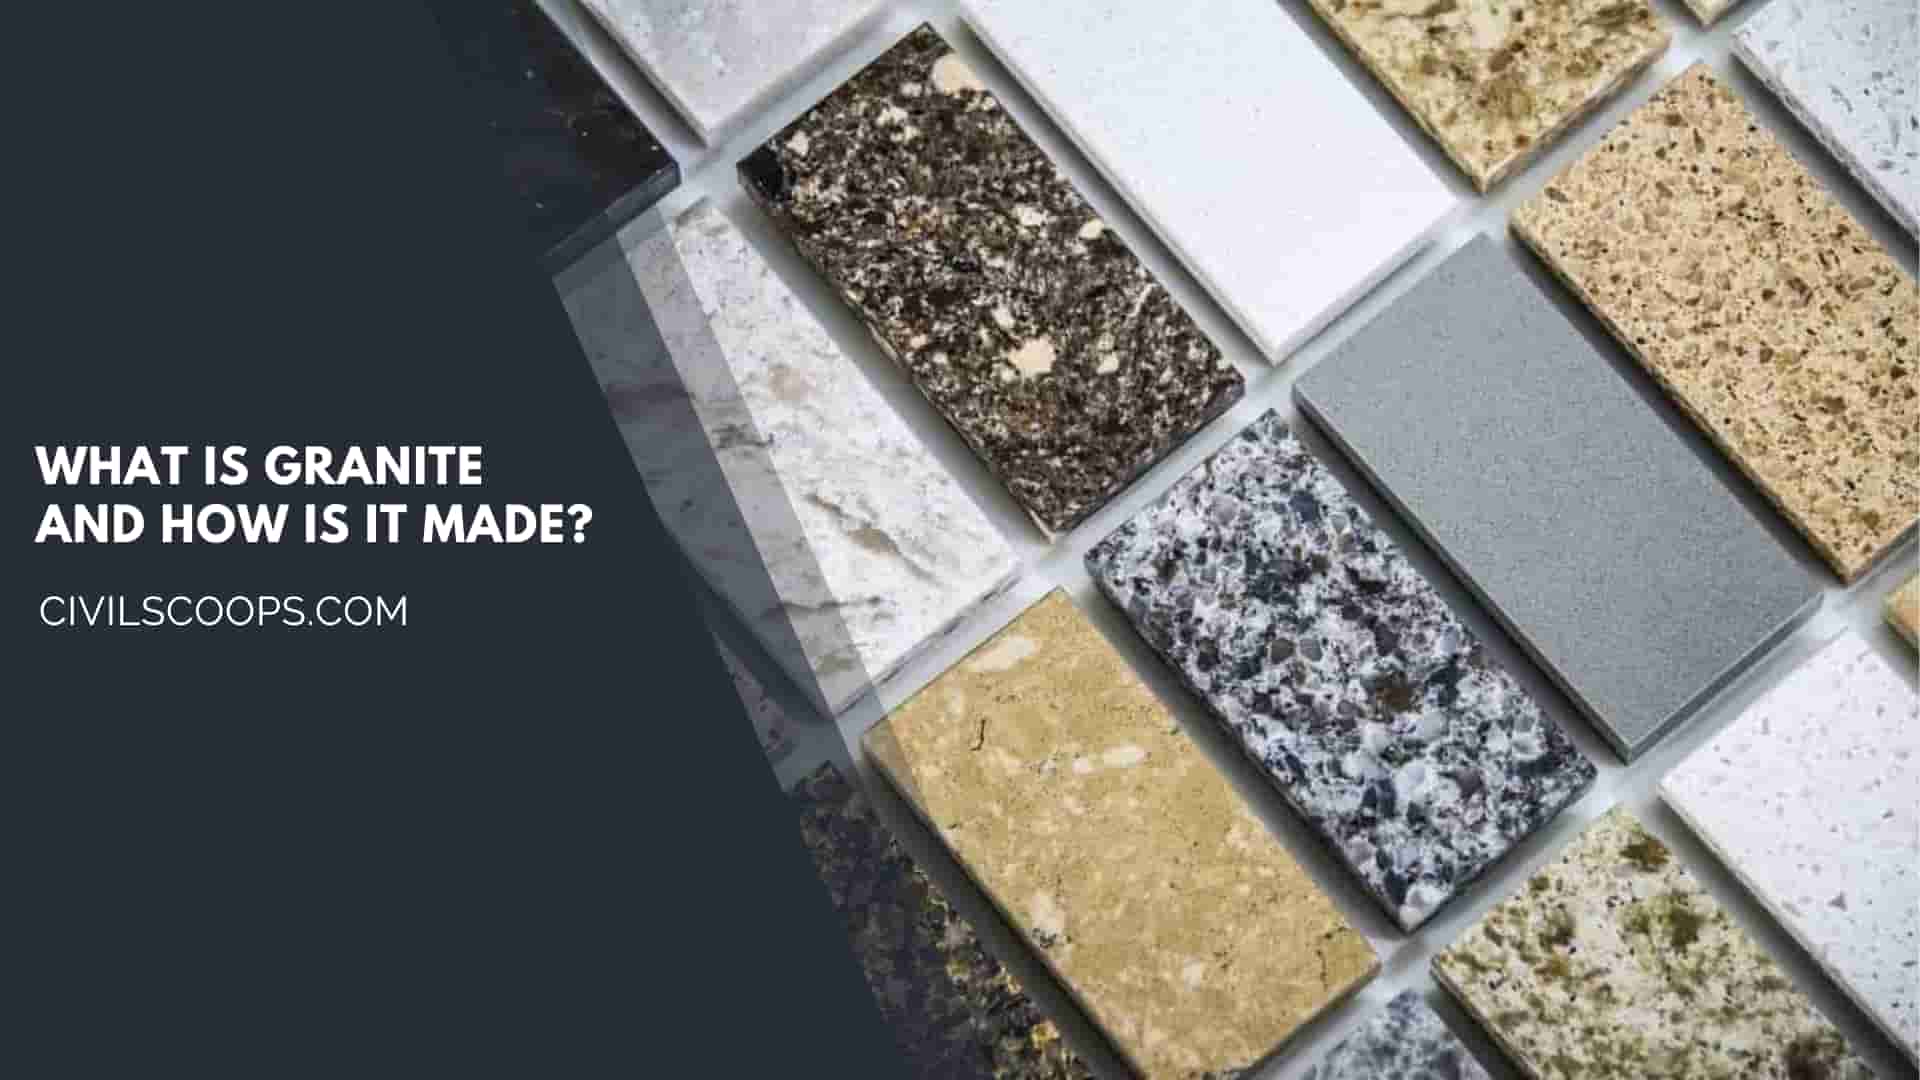 What Is Granite And How Is It Made?